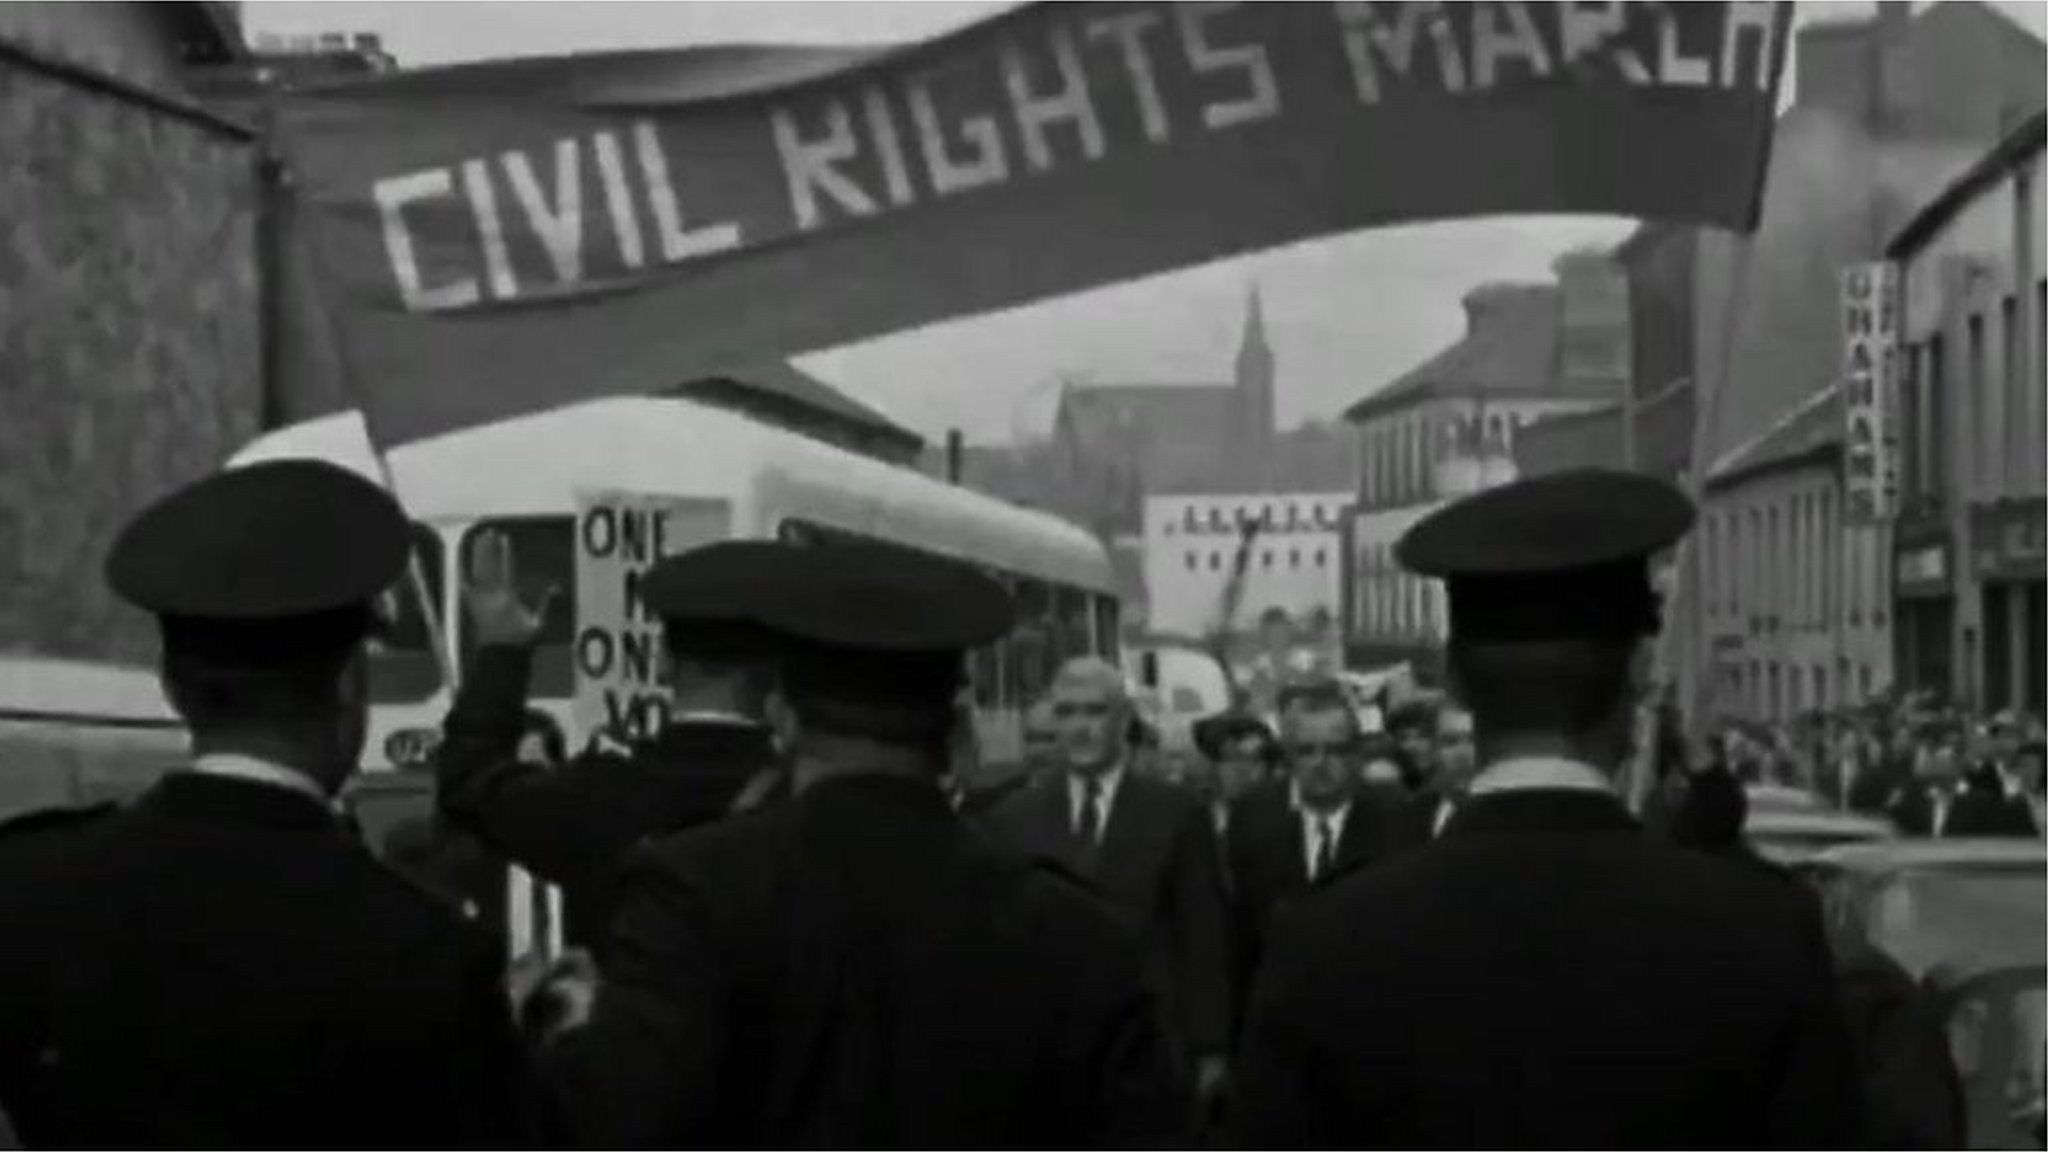 Civil Rights March banner